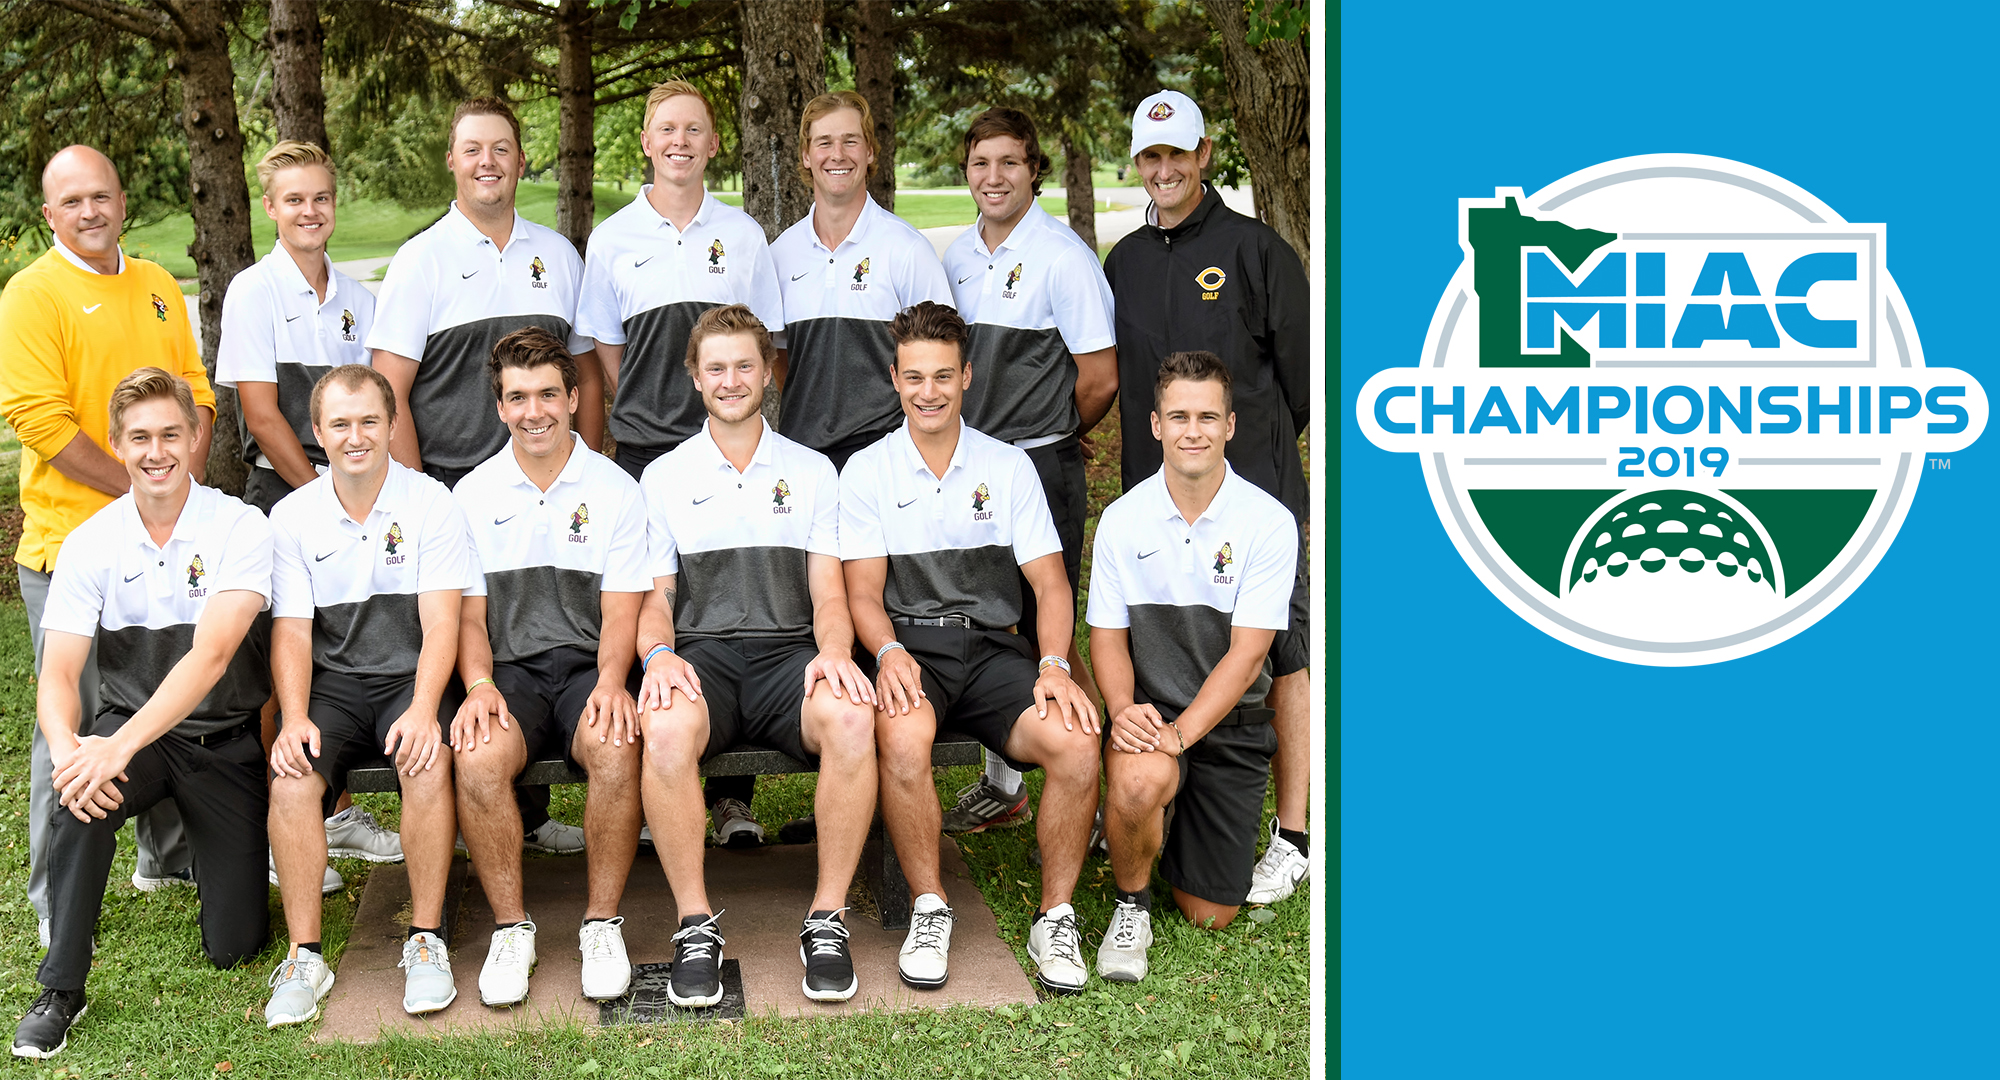 The Cobber men's golf team finished fifth at the MIAC Championship Meet.